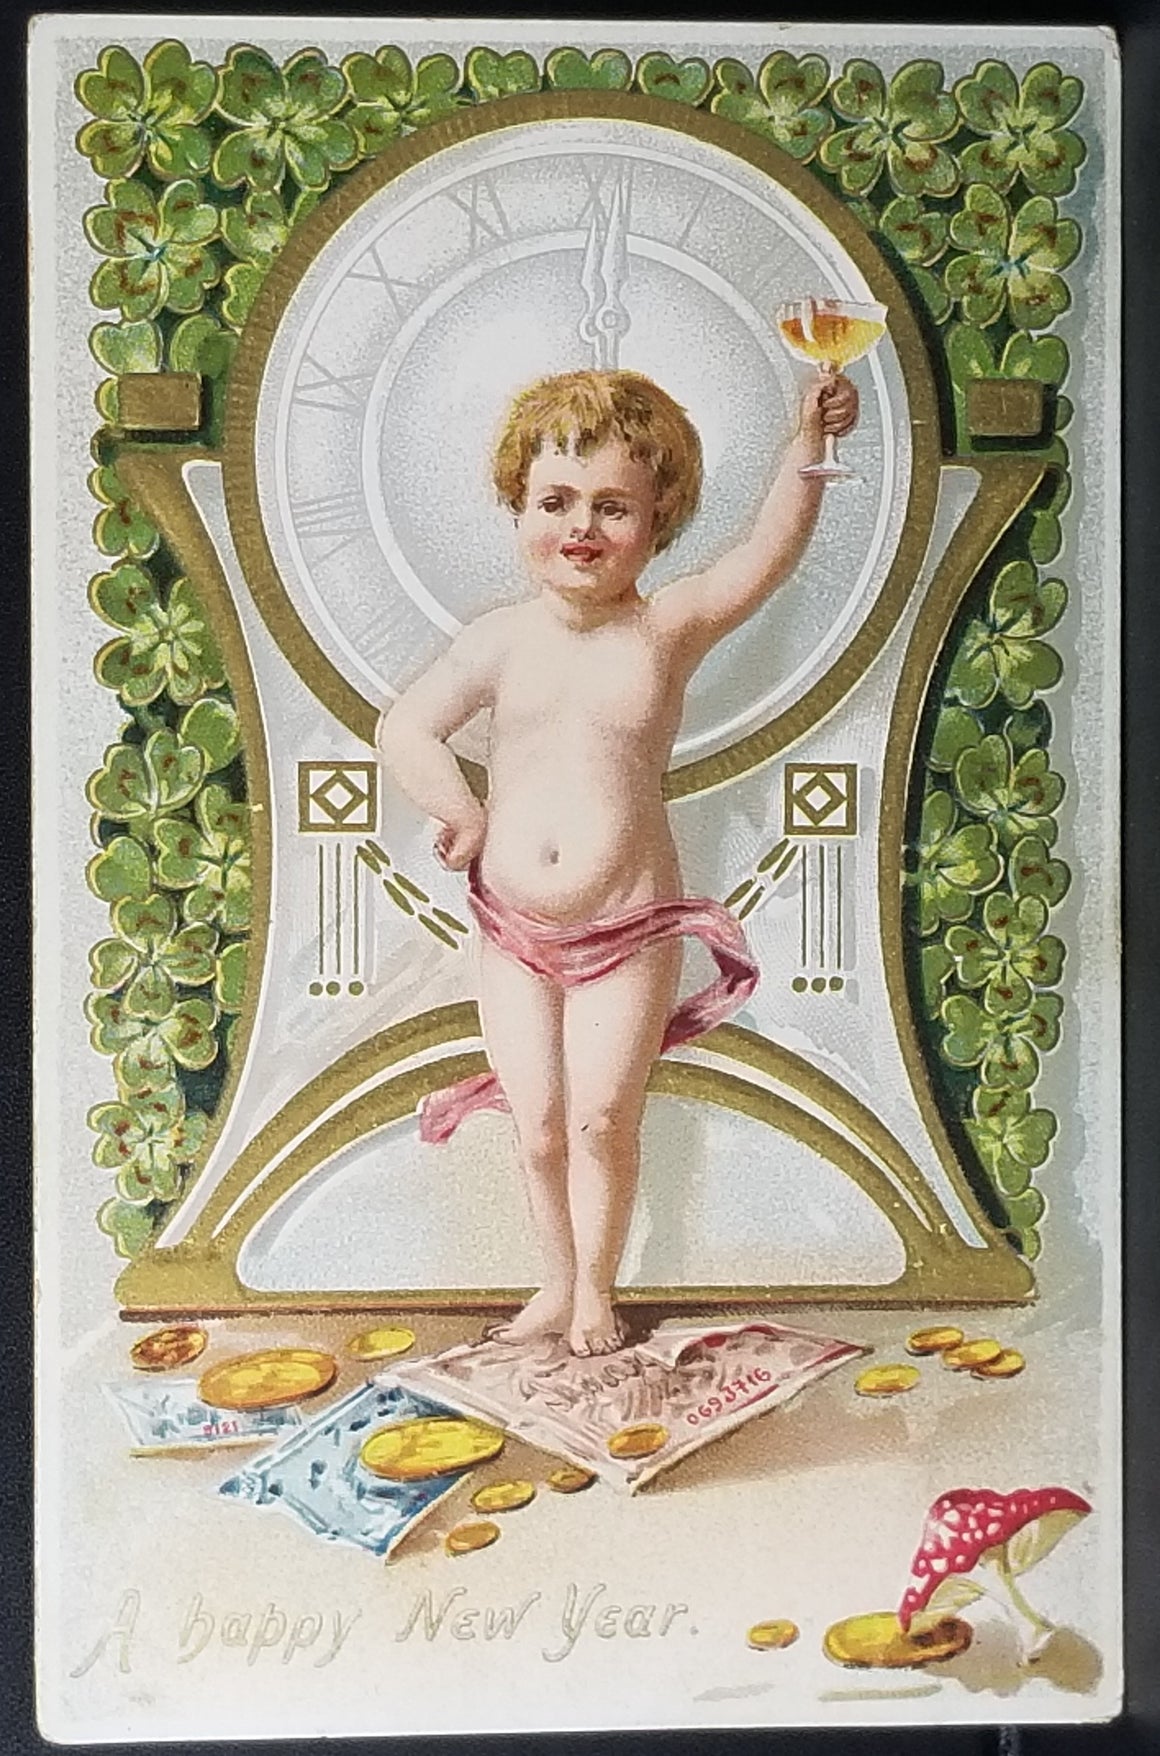 New Year Postcard Raphael Tuck Publishing Series 113 Baby New Year's Toasting Champagne w/ Gold Coins